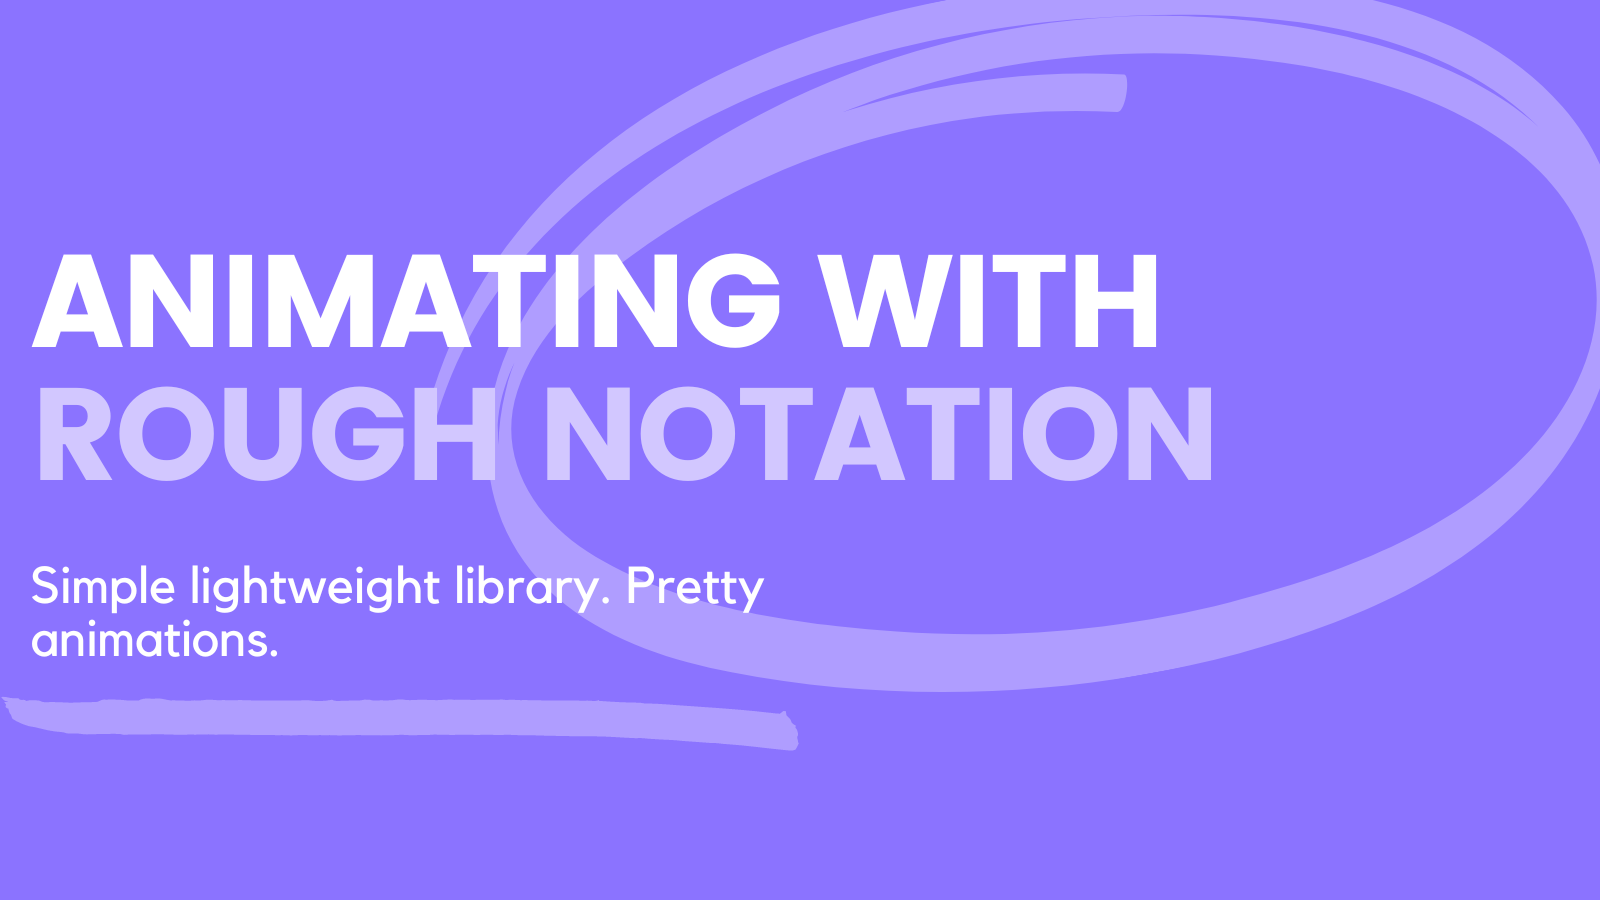 How to Use the Rough Notation Library to Animate Your Website